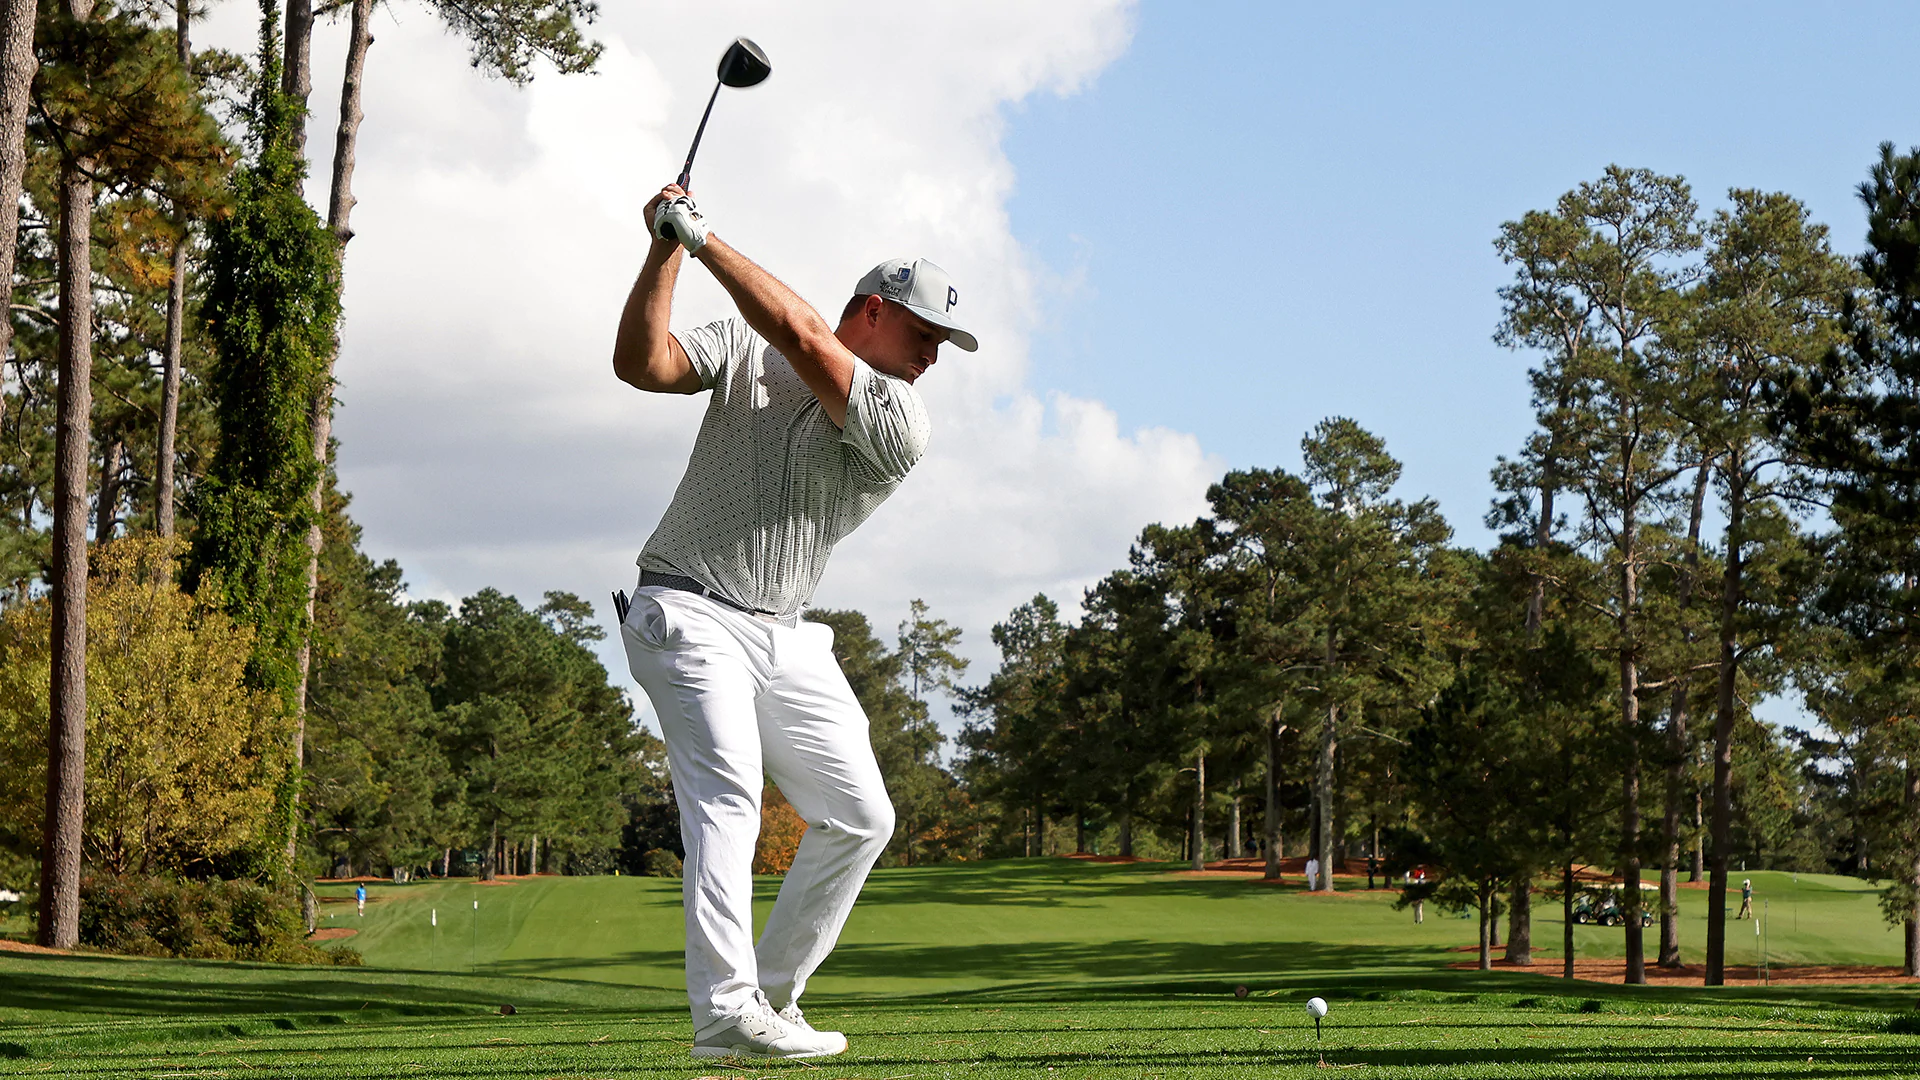 Even without 48-inch driver, Bryson ready to test Augusta National’s limits